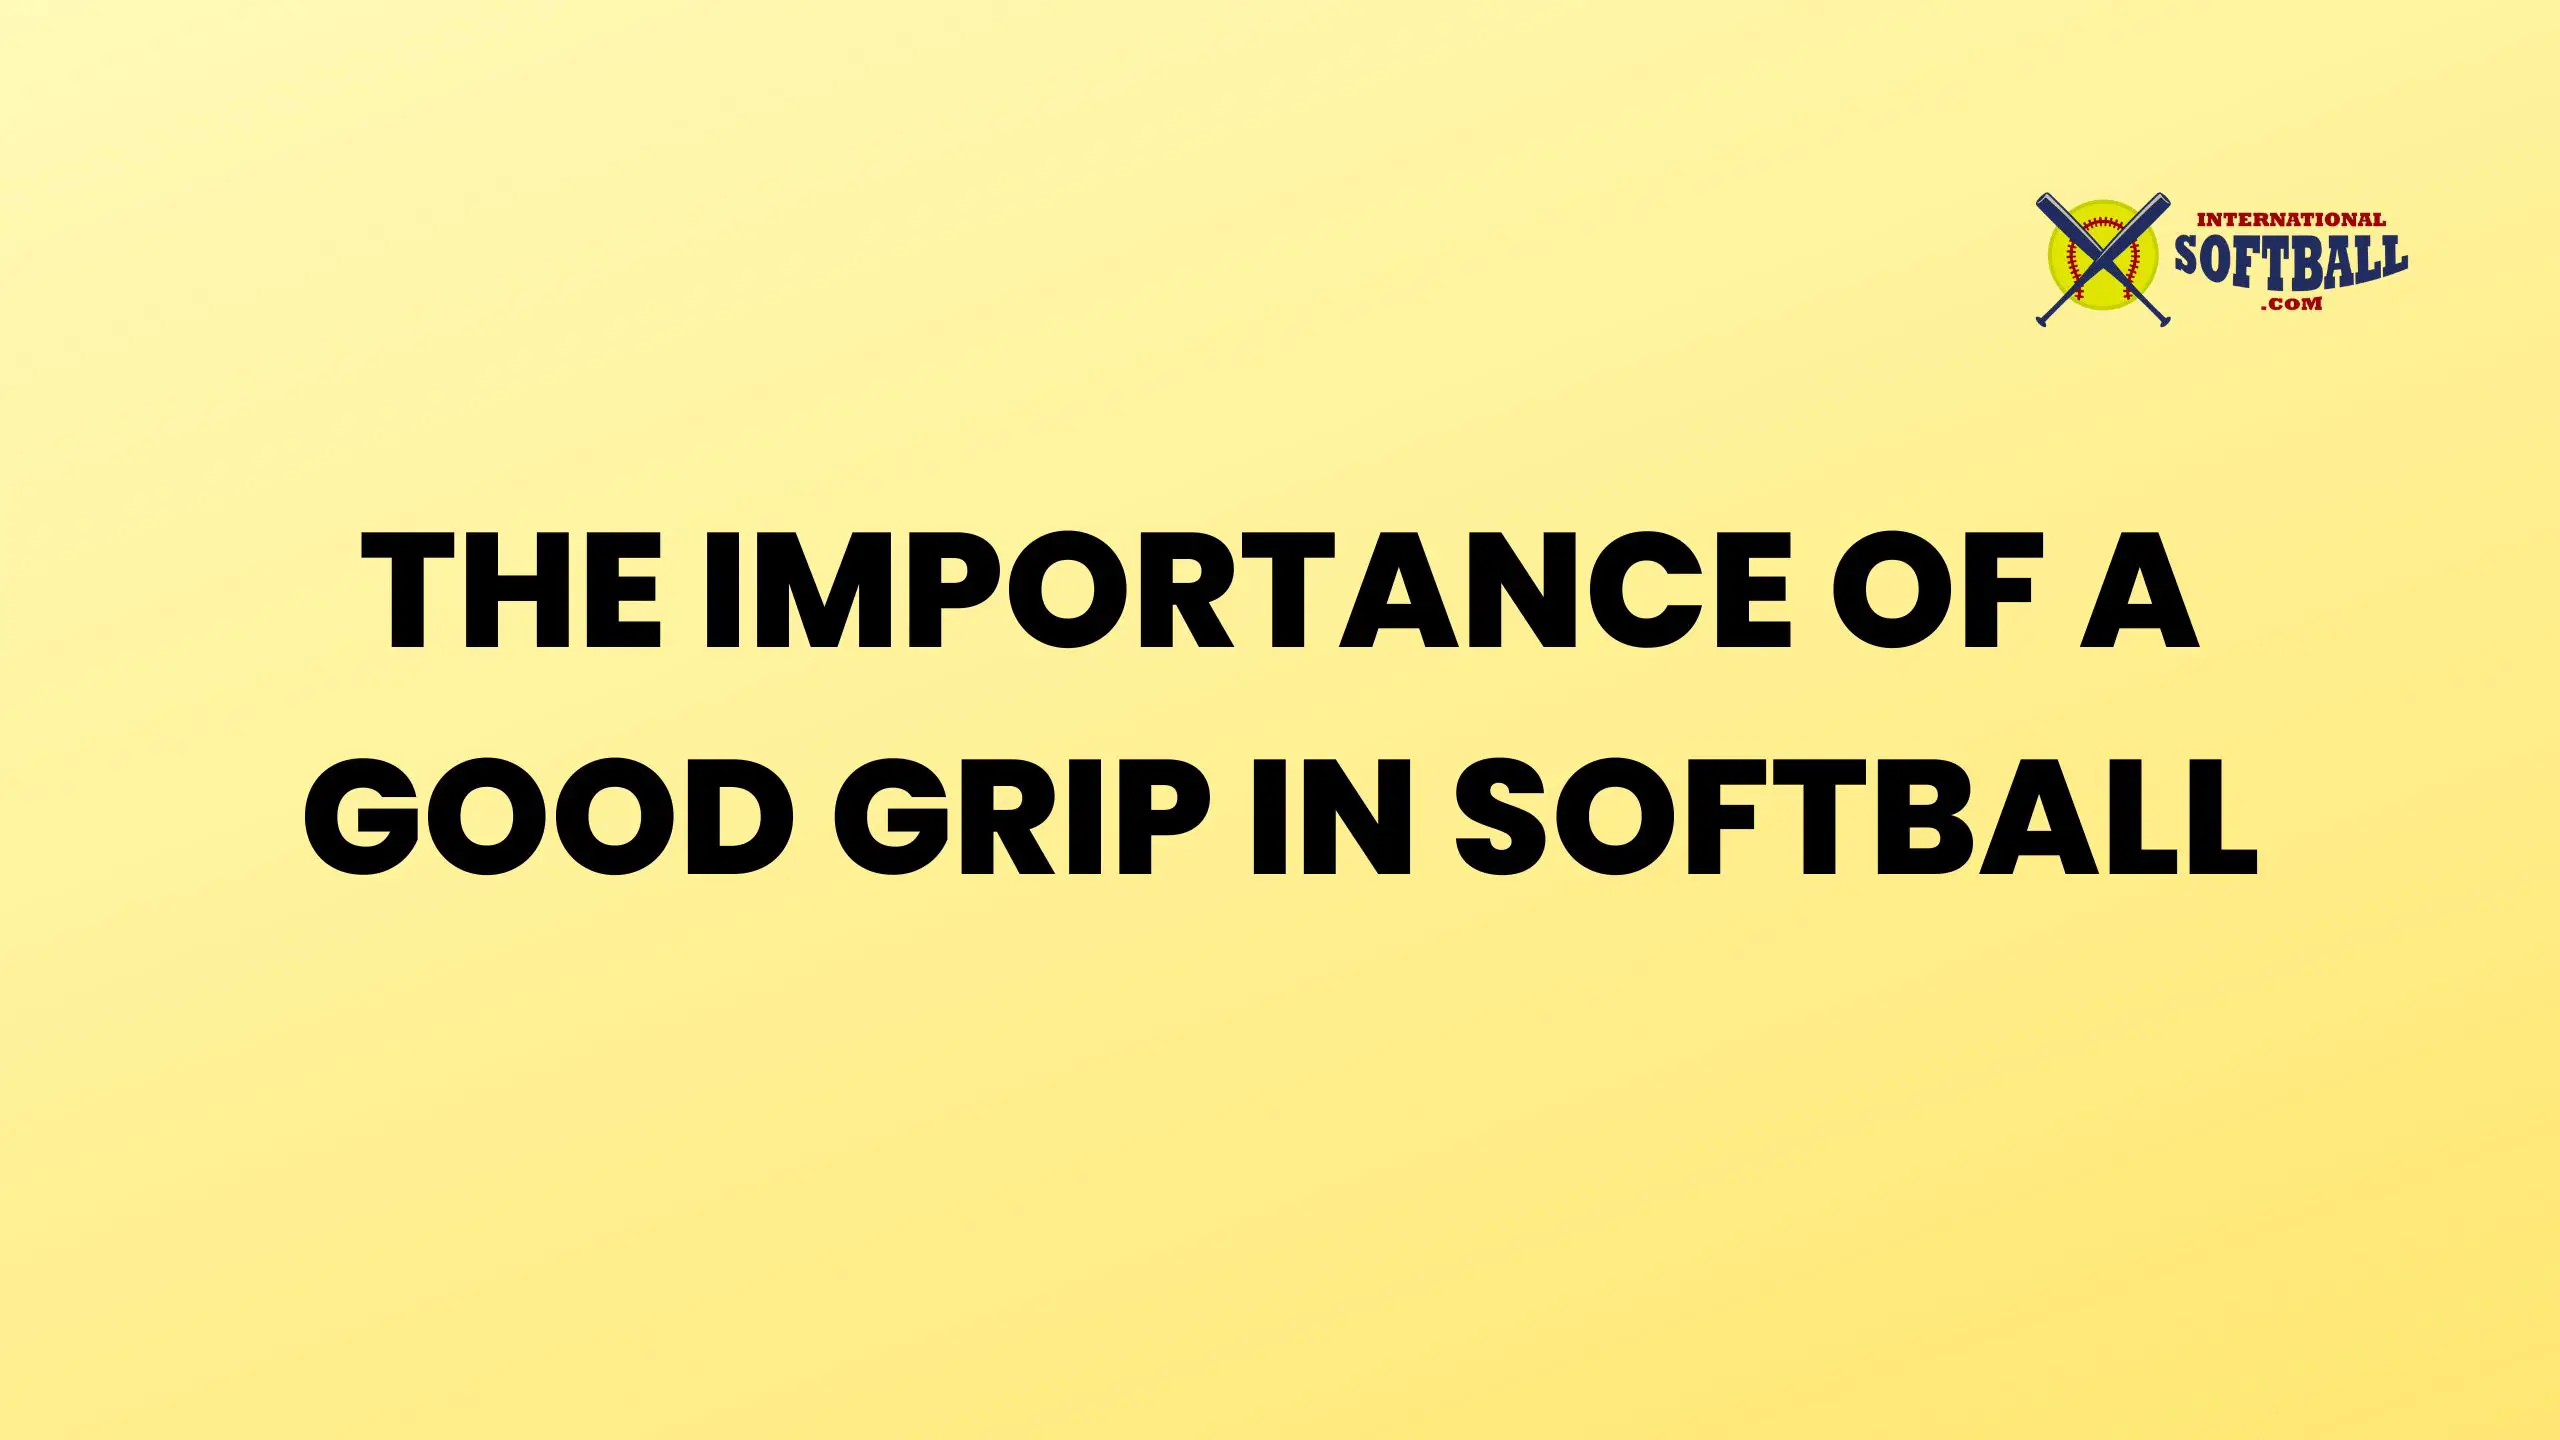 THE IMPORTANCE OF A GOOD GRIP IN SOFTBALL